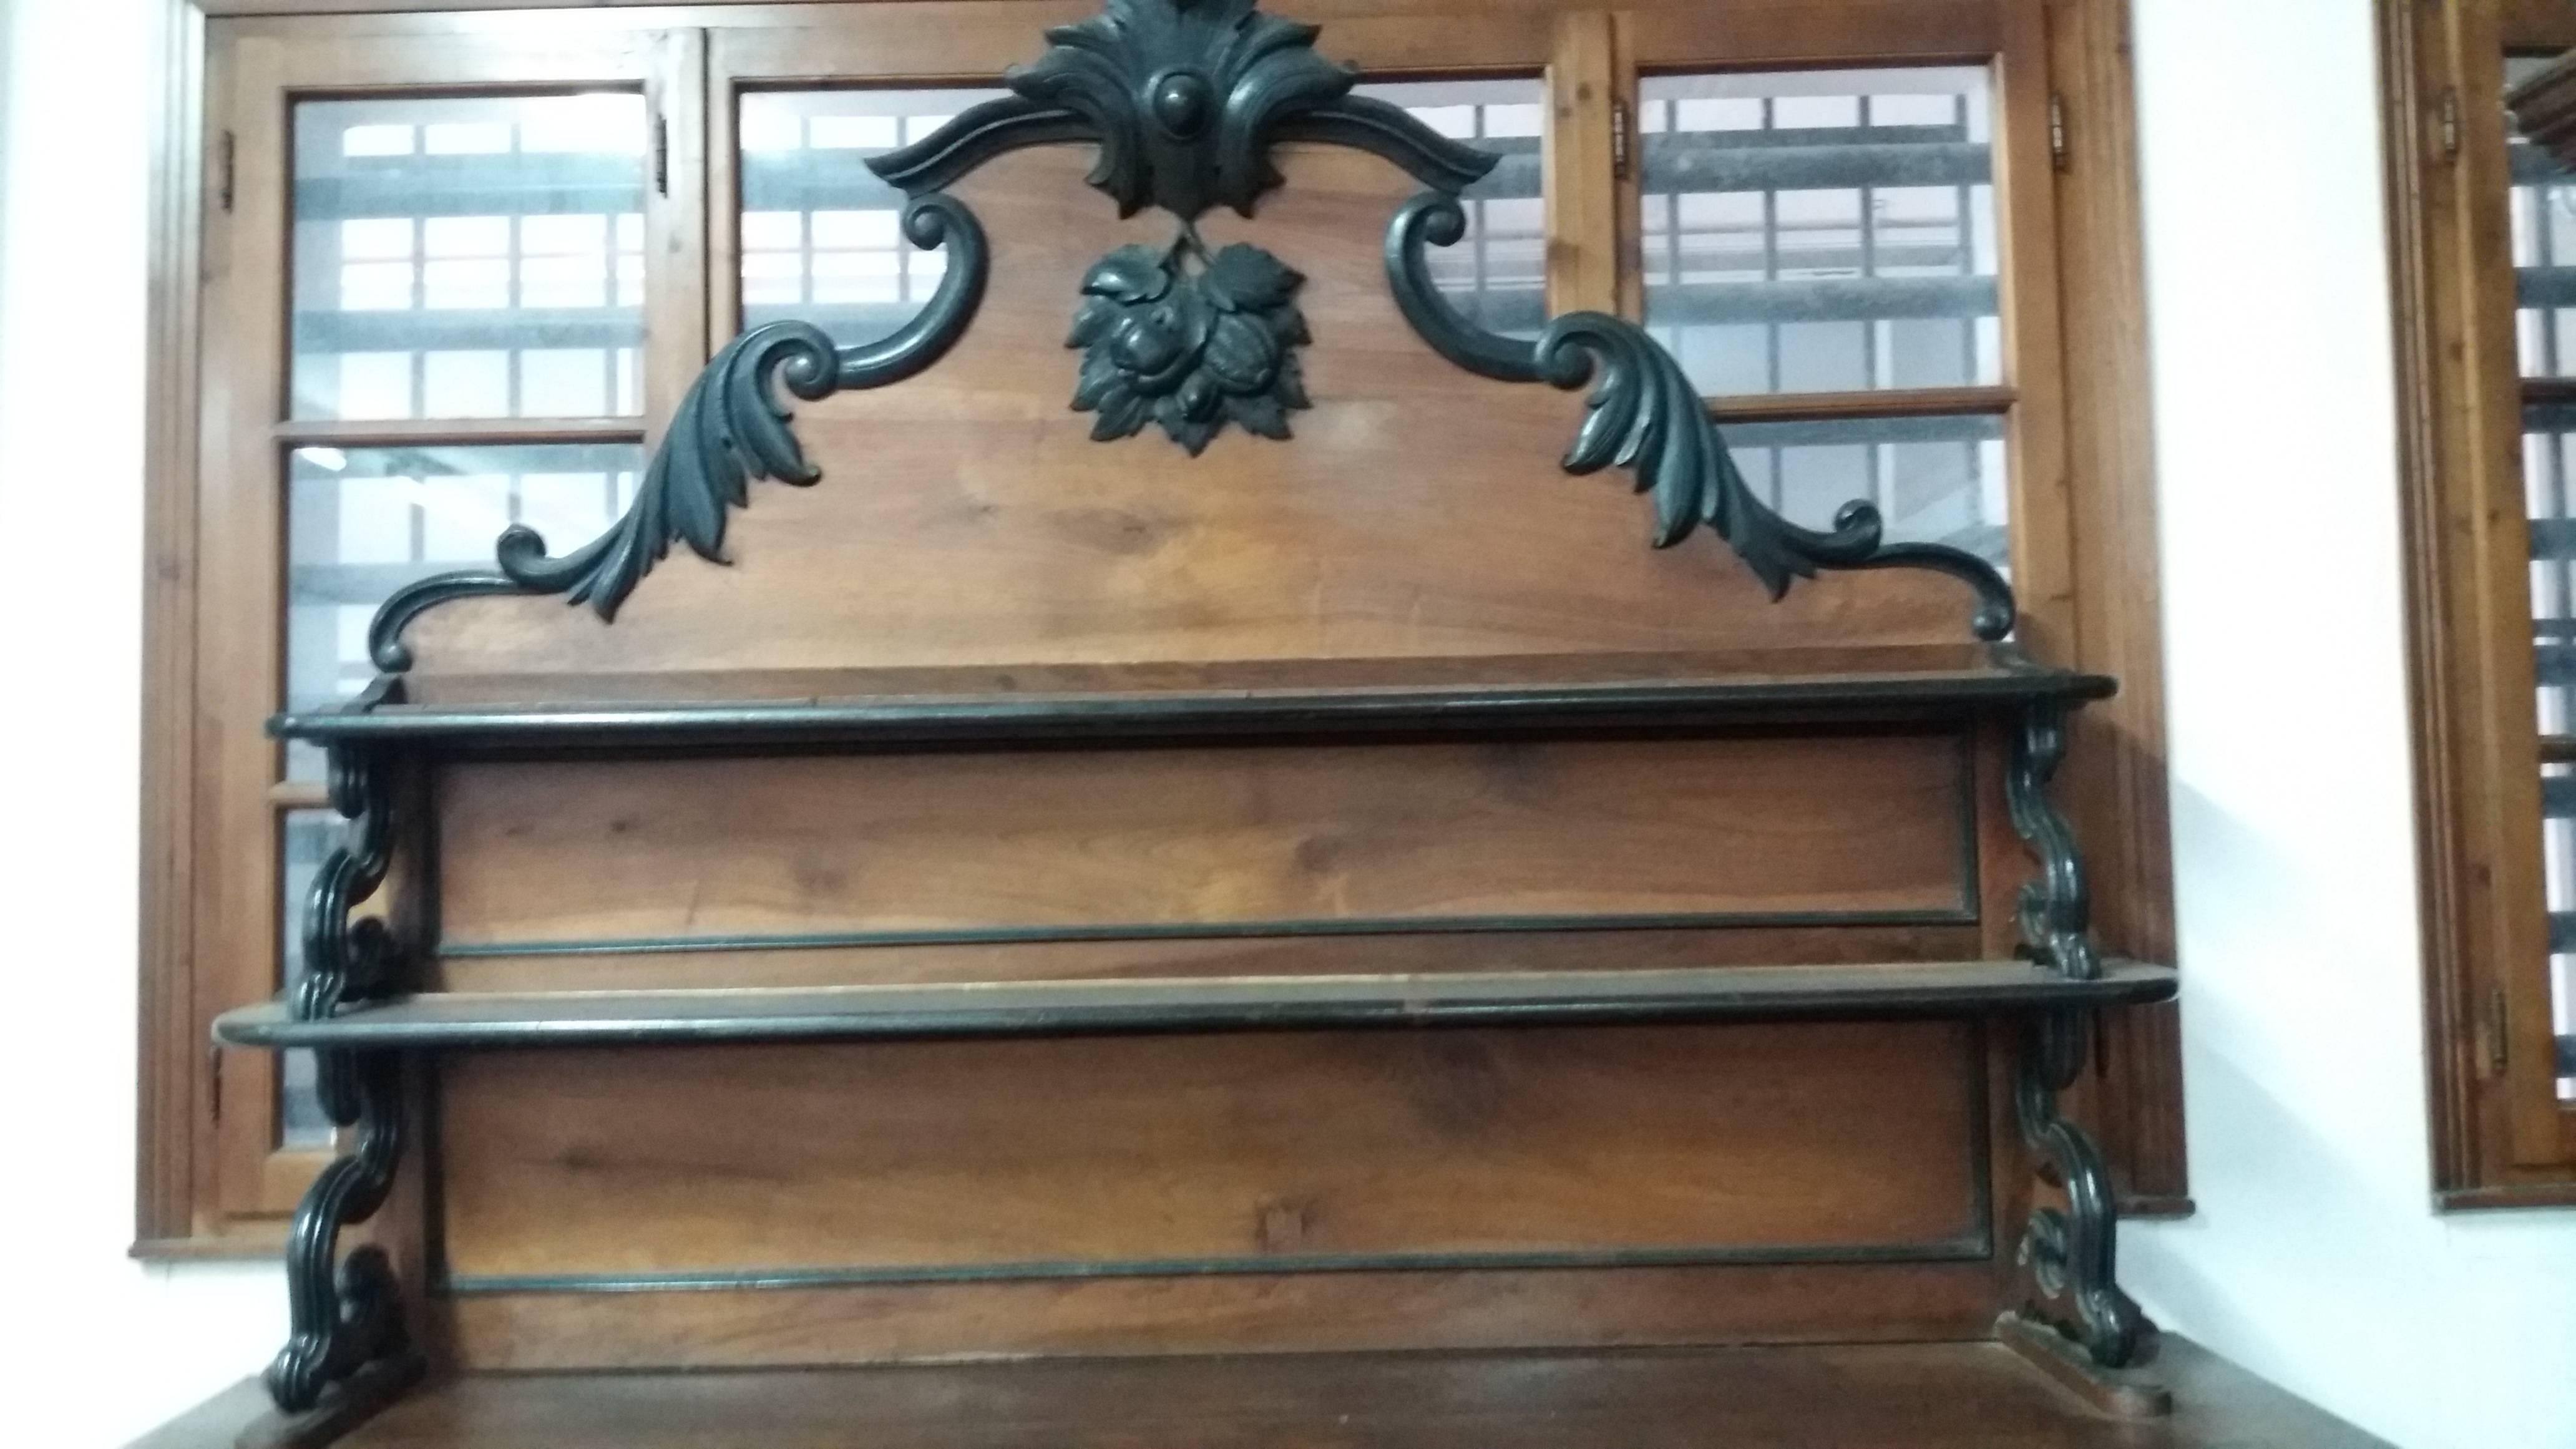 Designed to be the centerpiece of an early 19th century dining room and crafted of solid walnut and walnut root, the buffet features several elevated serving areas, including a pair of curved, locking drawers, a long upper shelf, and a strong,